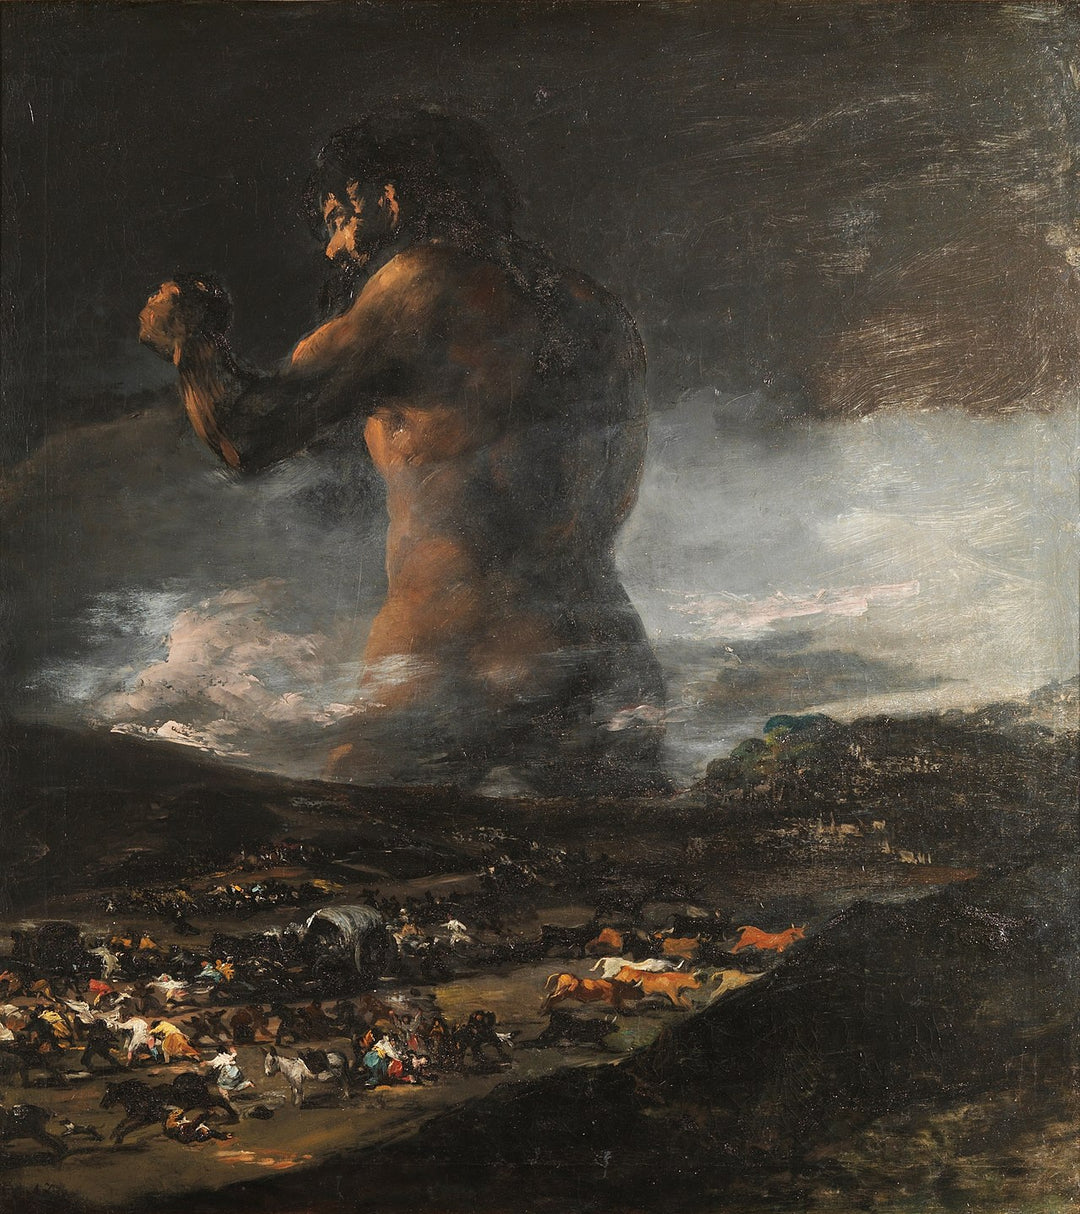 The Colossus by Francisco Goya Reproduction for Sale, Goya paintings, blue surf art